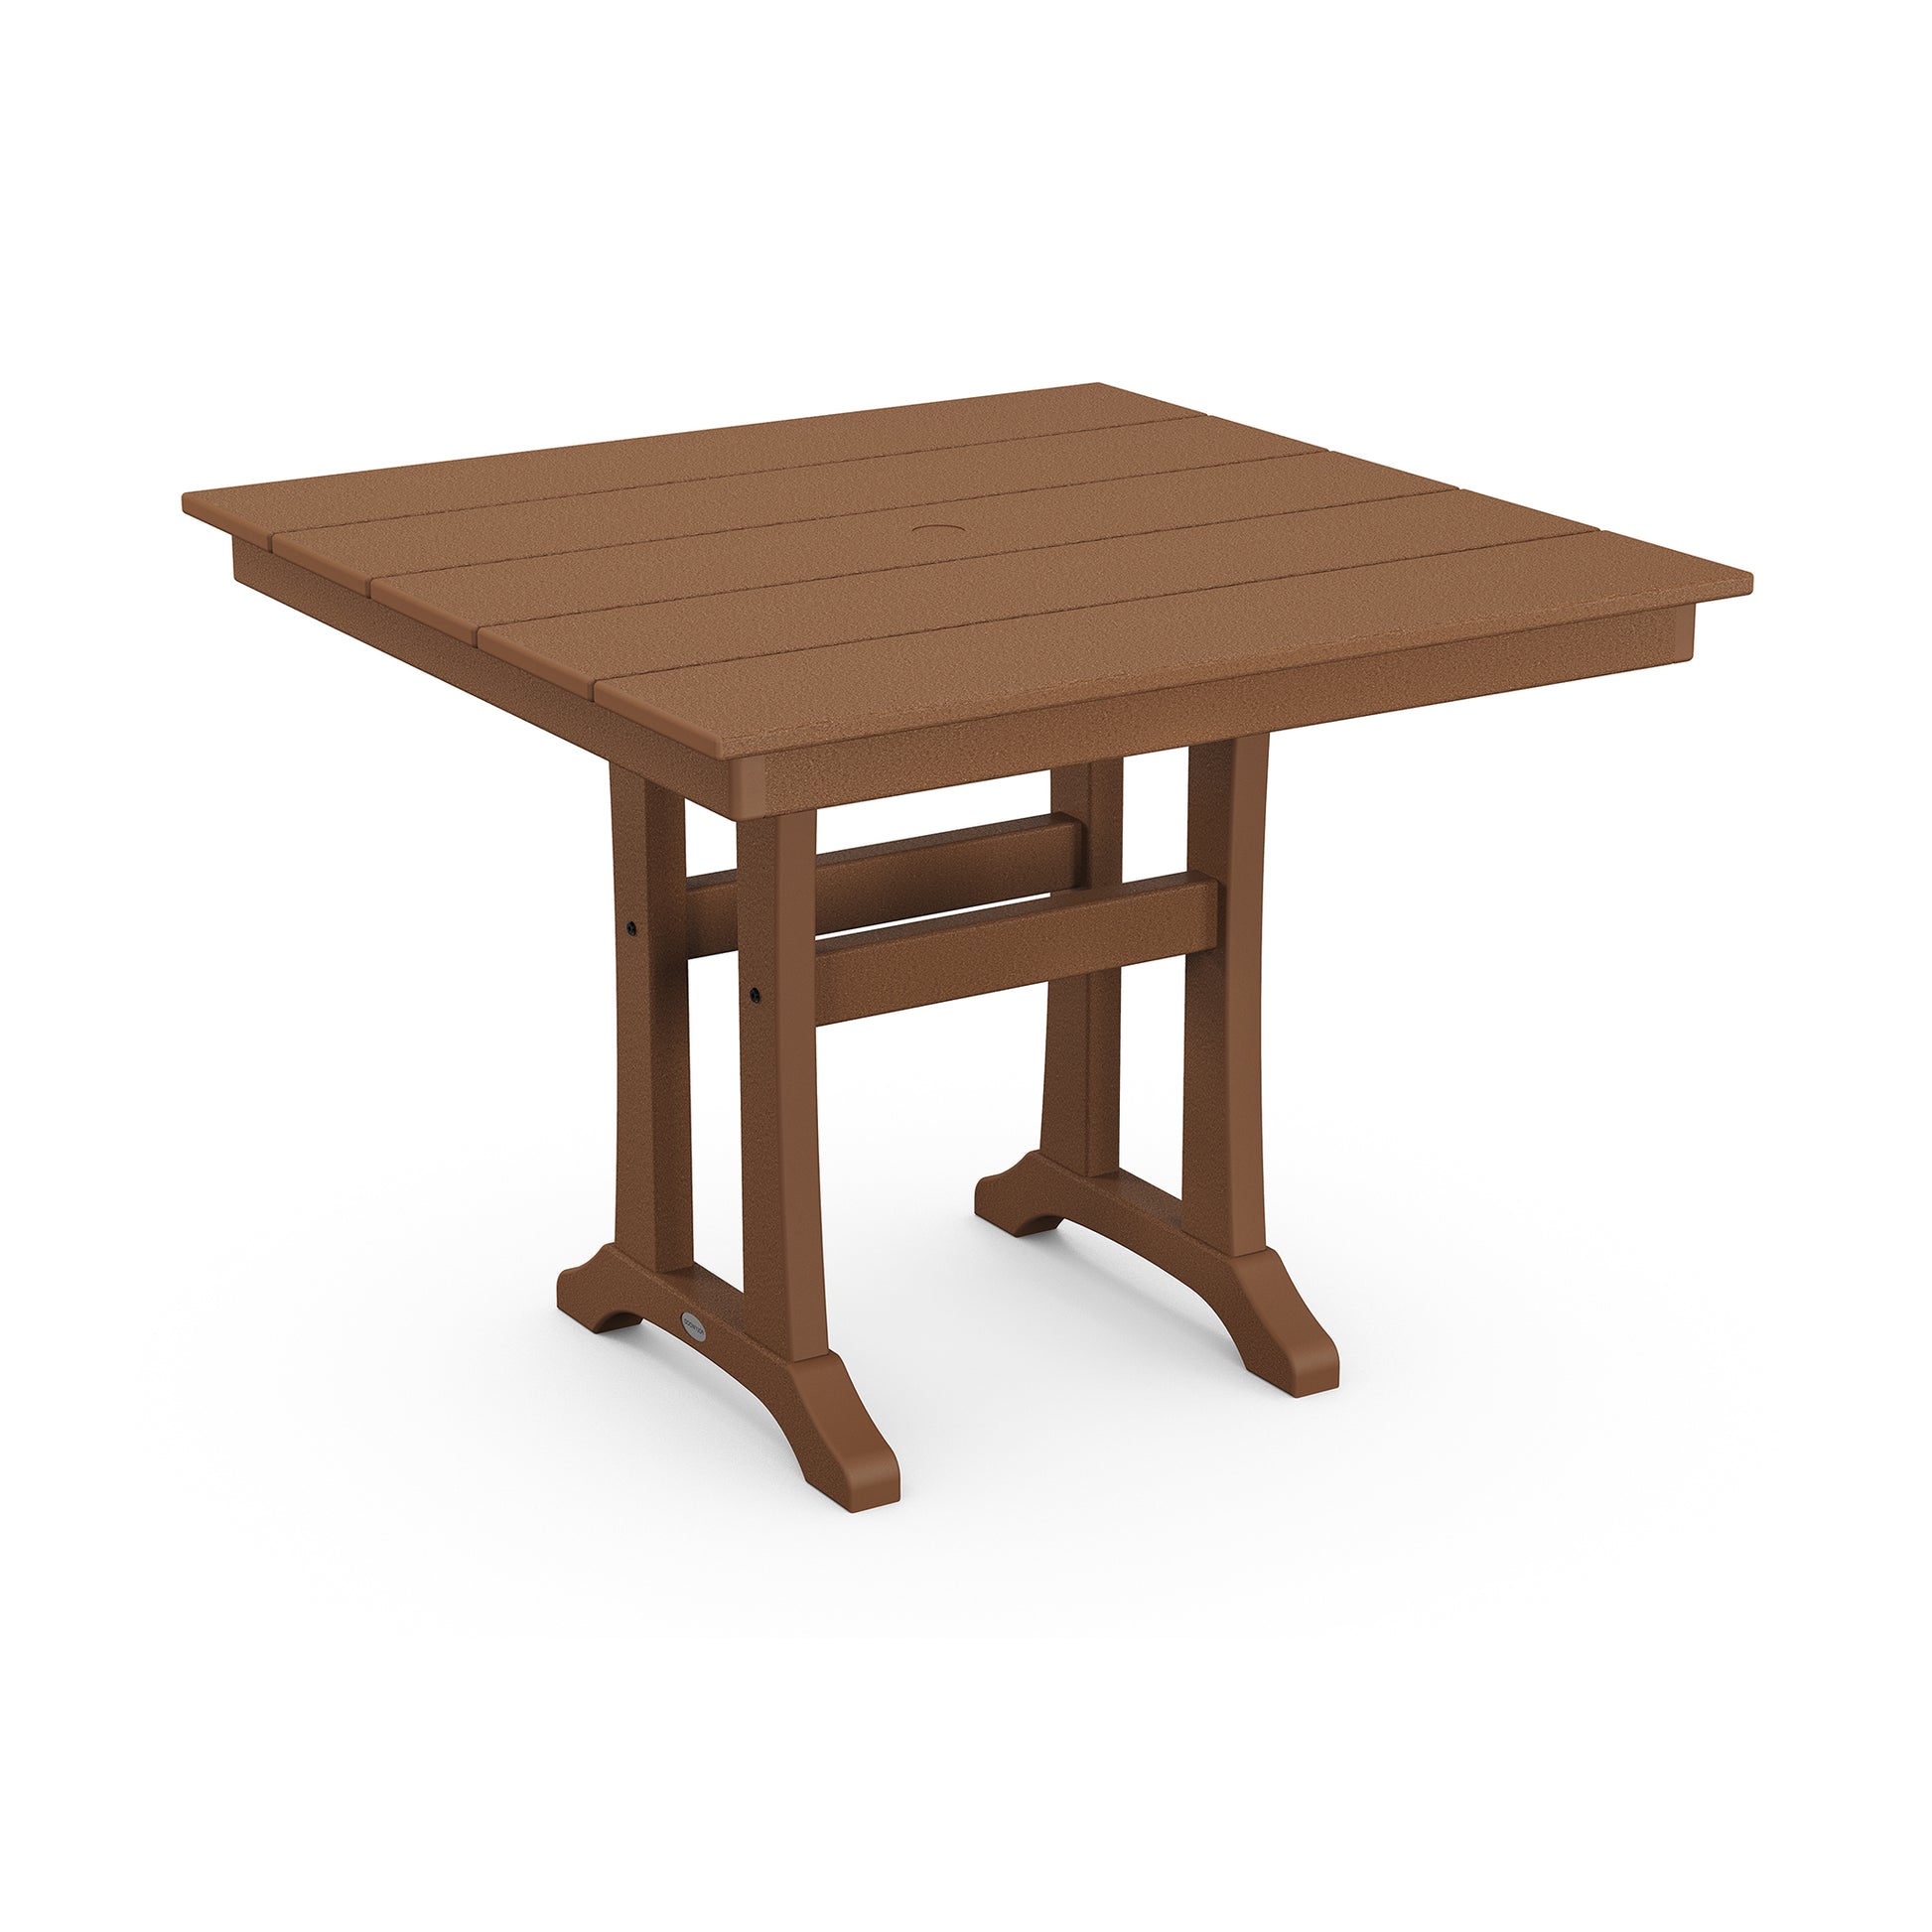 A simple brown POLYWOOD Farmhouse Trestle 37" Dining Table with a rectangular top and sturdy legs, featuring a lower shelf for additional storage, isolated on a white background.